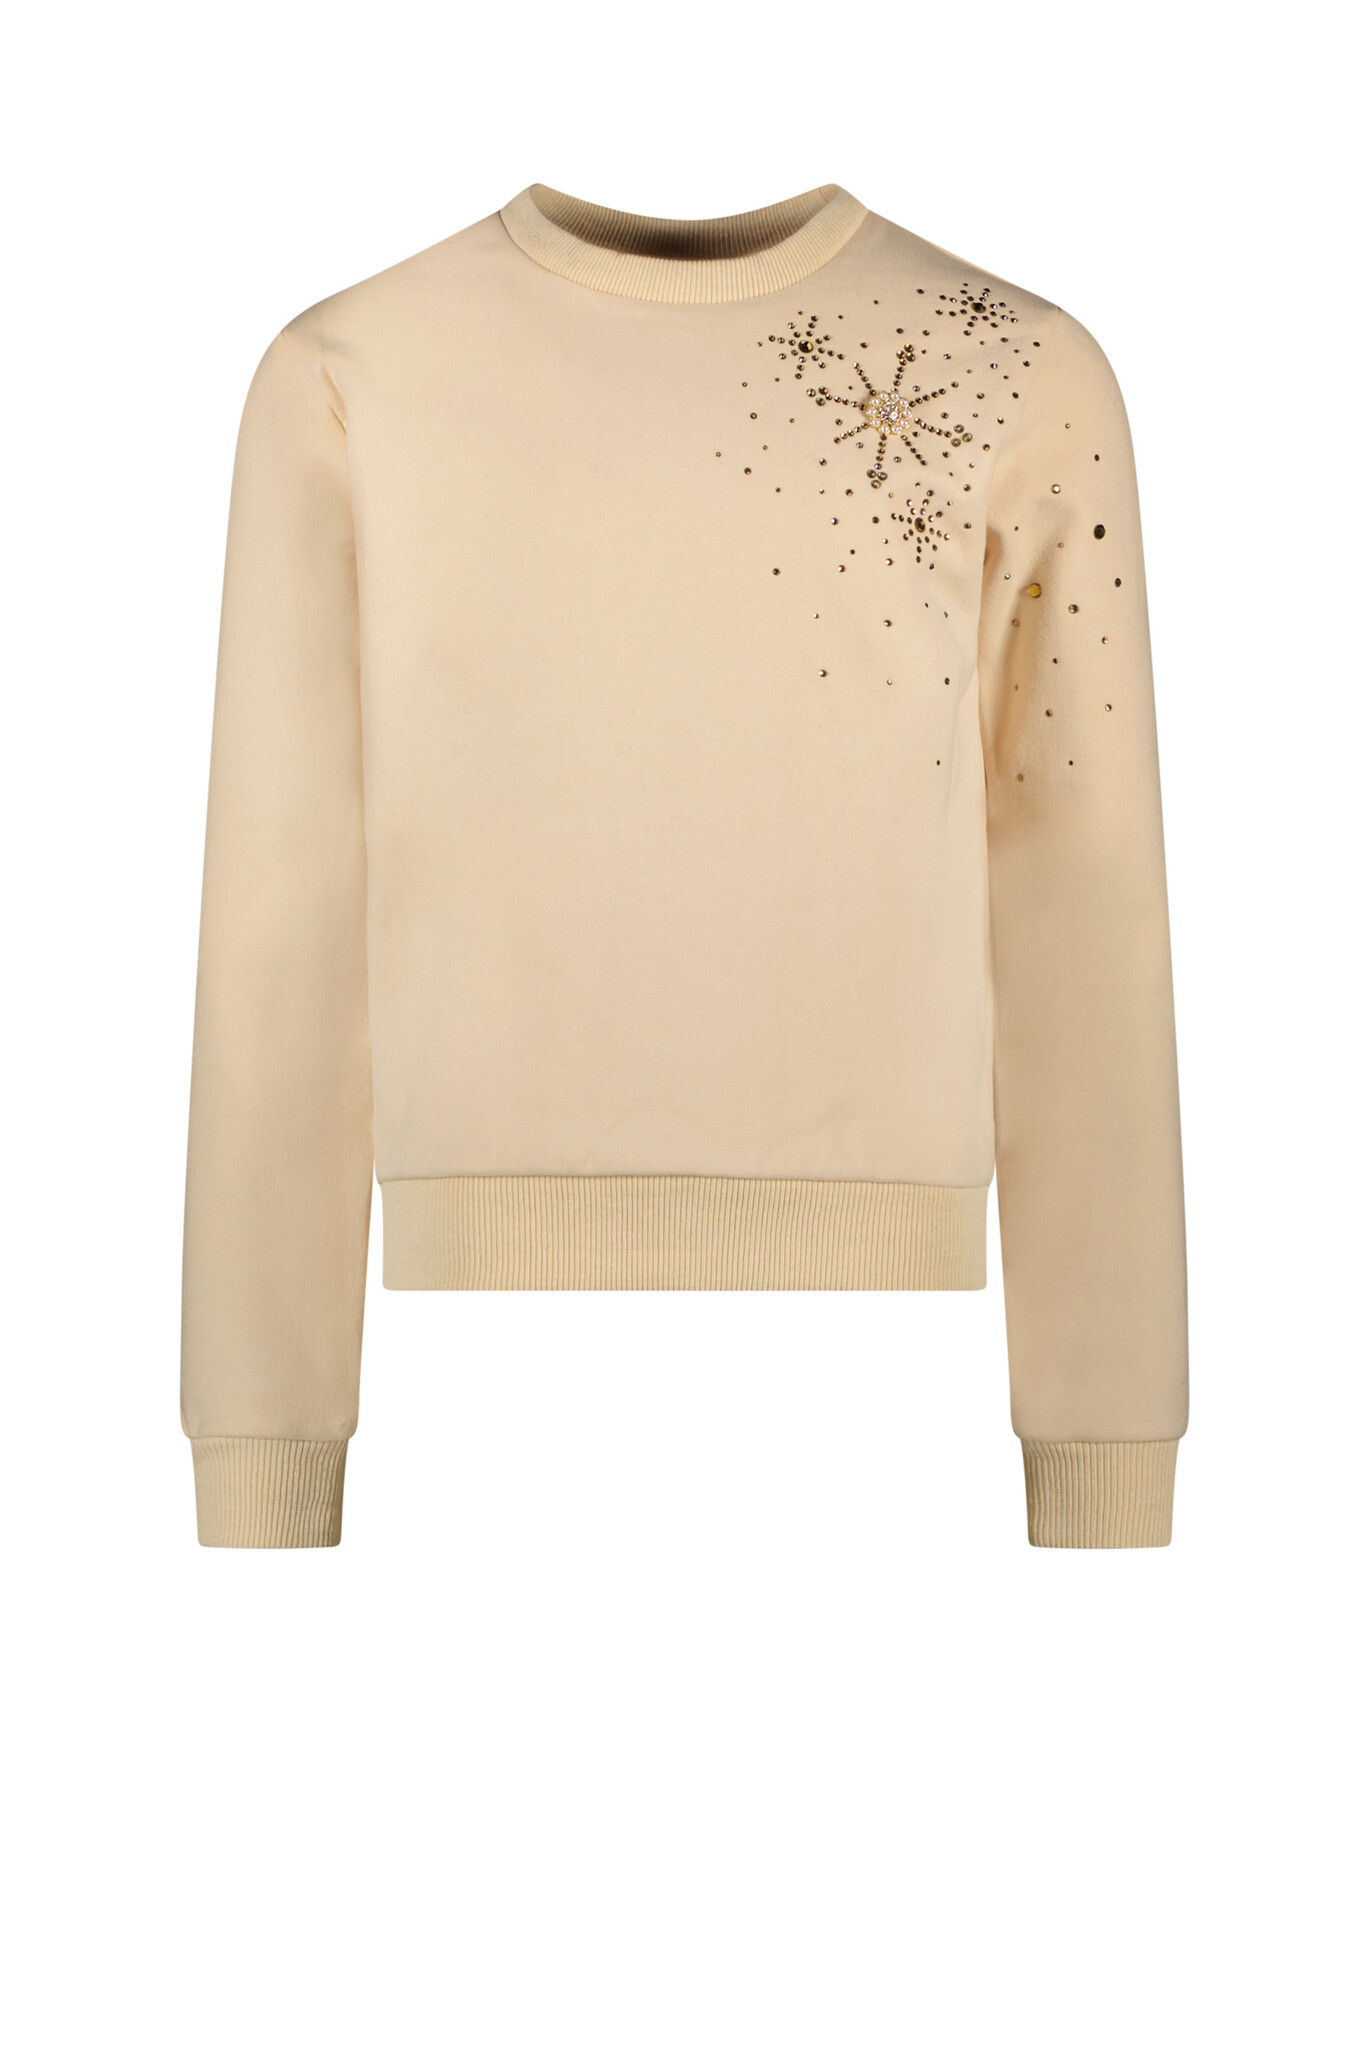 Le Chic Meisjes sweater - Odina - Pearled ivory